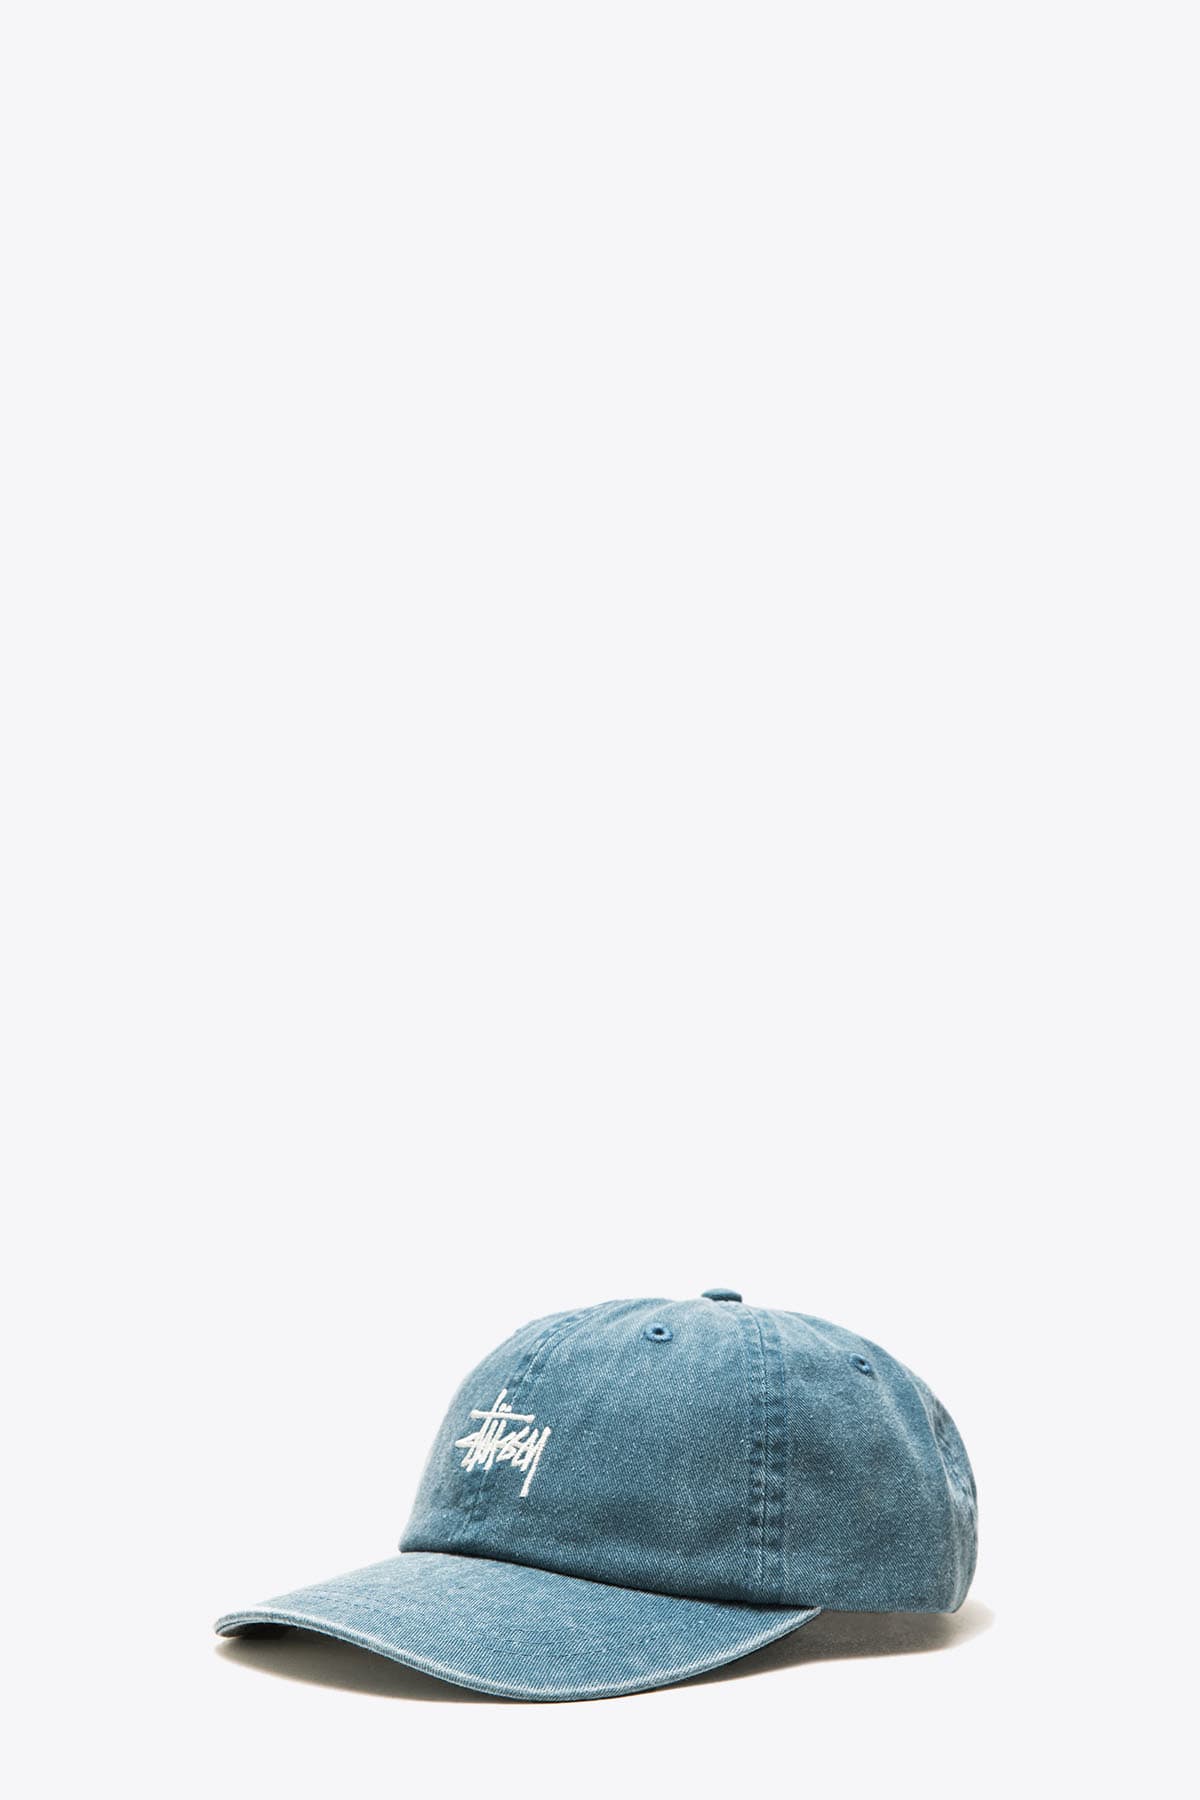 Stussy Washed Stock Low Pro Cap Light blue denim cap - Washed stock low pro cap